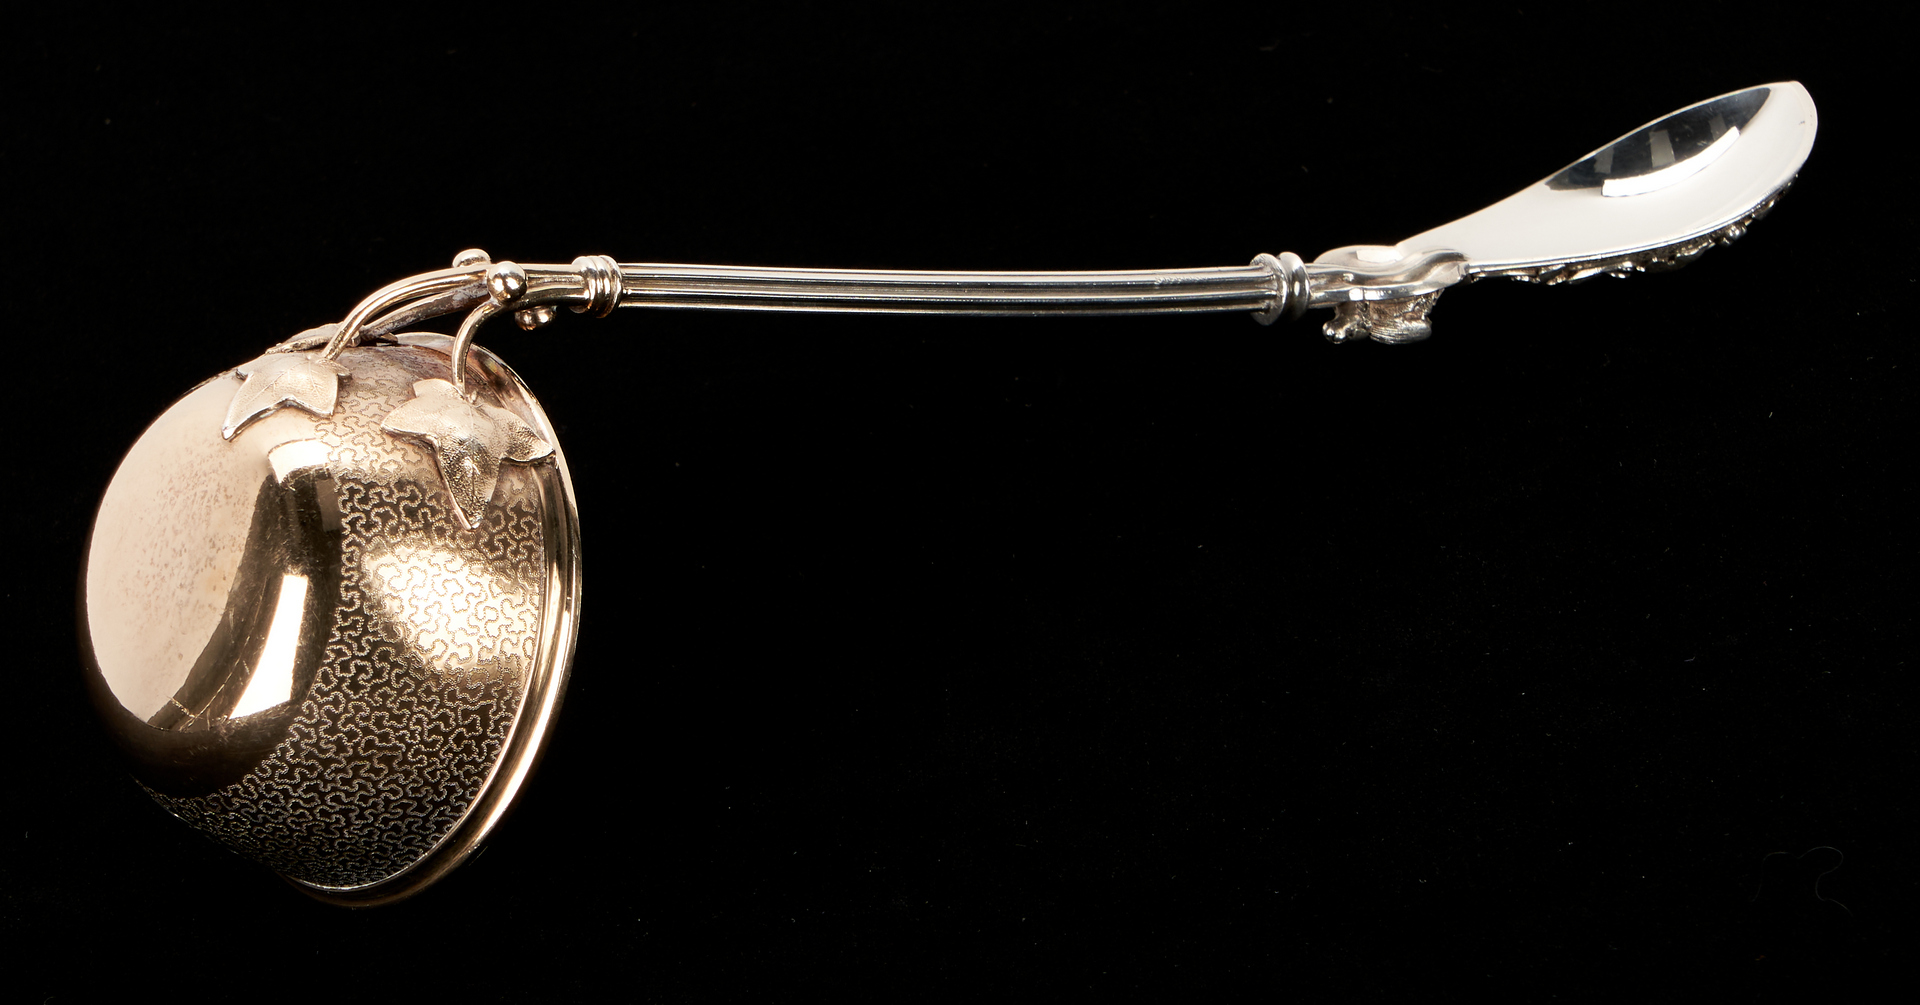 Lot 439: 19th C. Silver Ladle with Insect & Gorham Sterling Asparagus Tongs